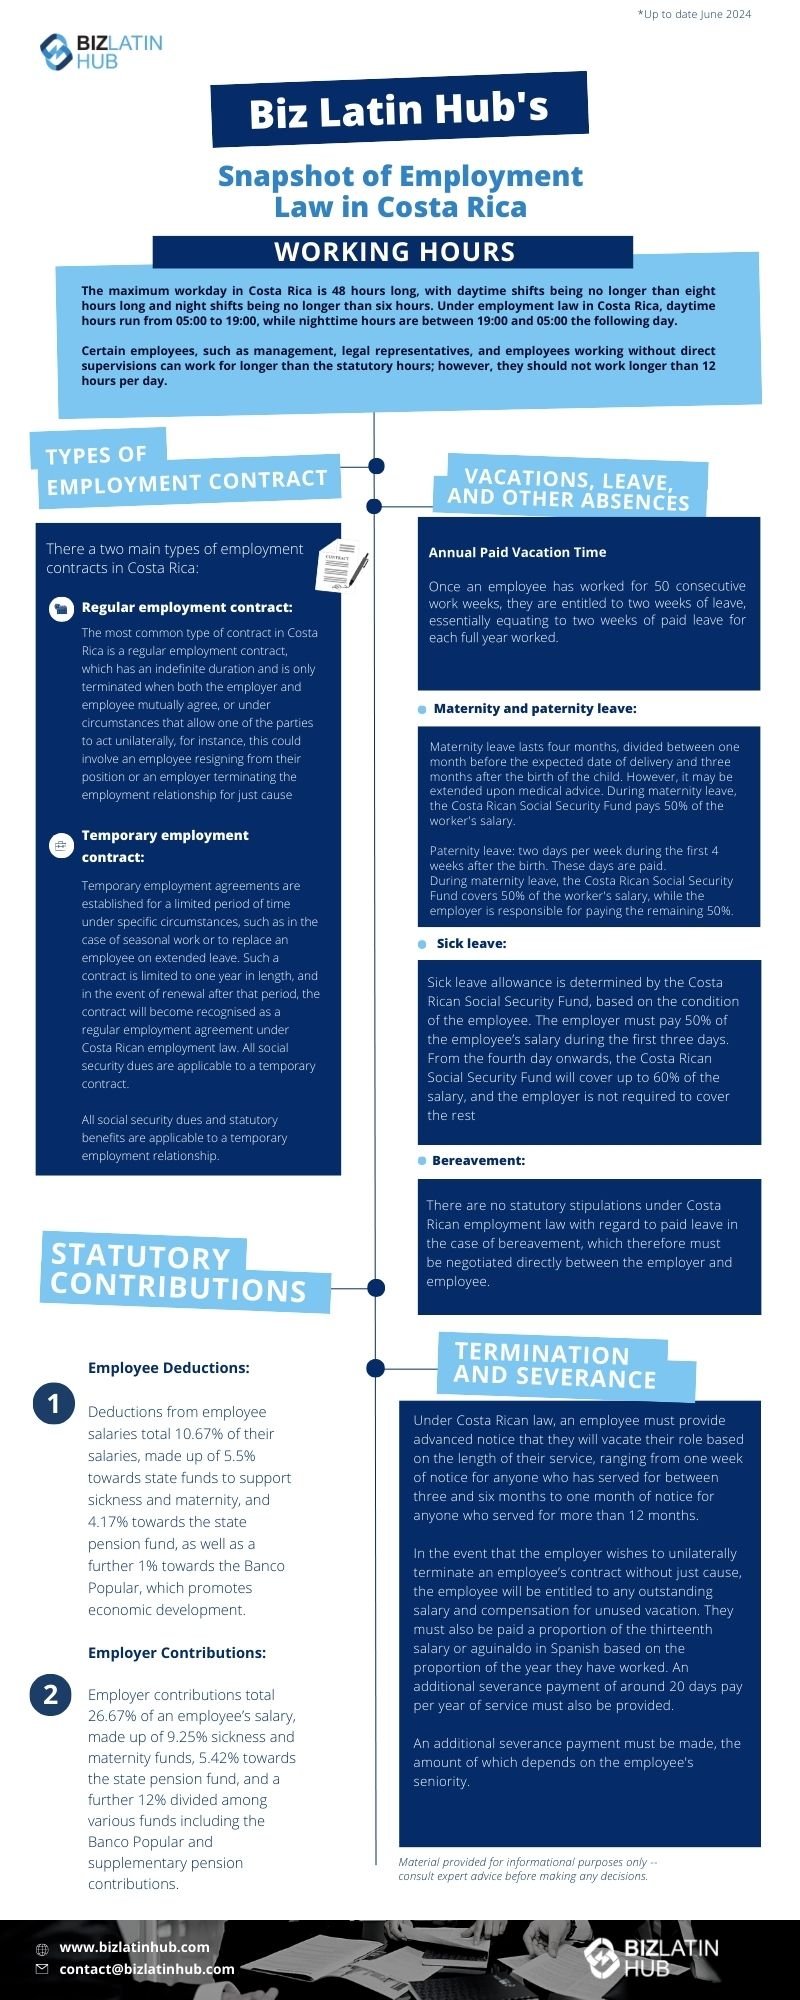 Infographic titled "Snapshot of Employment Law in Costa Rica" by Biz Latin Hub. It covers types of employment contracts, statutory contributions, working hours, vacations, sick leave, bereavement leave, and termination/severance information. This essential guide simplifies employment law in Costa Rica for businesses and employees alike.